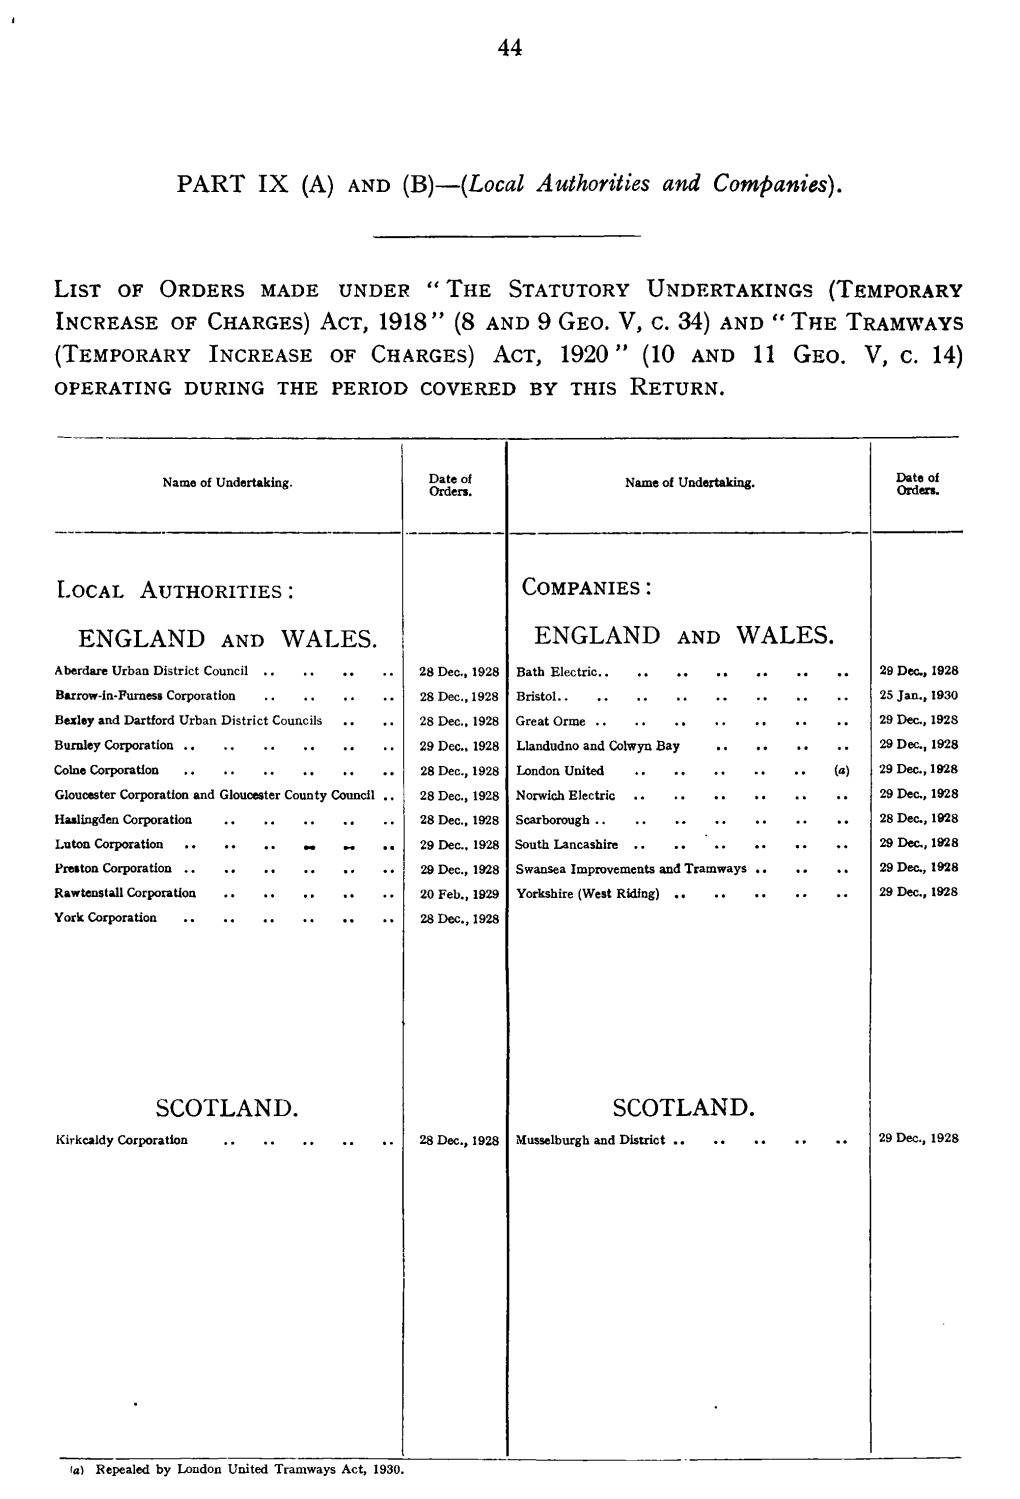 The Tramways Charges) Act, 1920” (10 and 11 Geo. V, C. 14